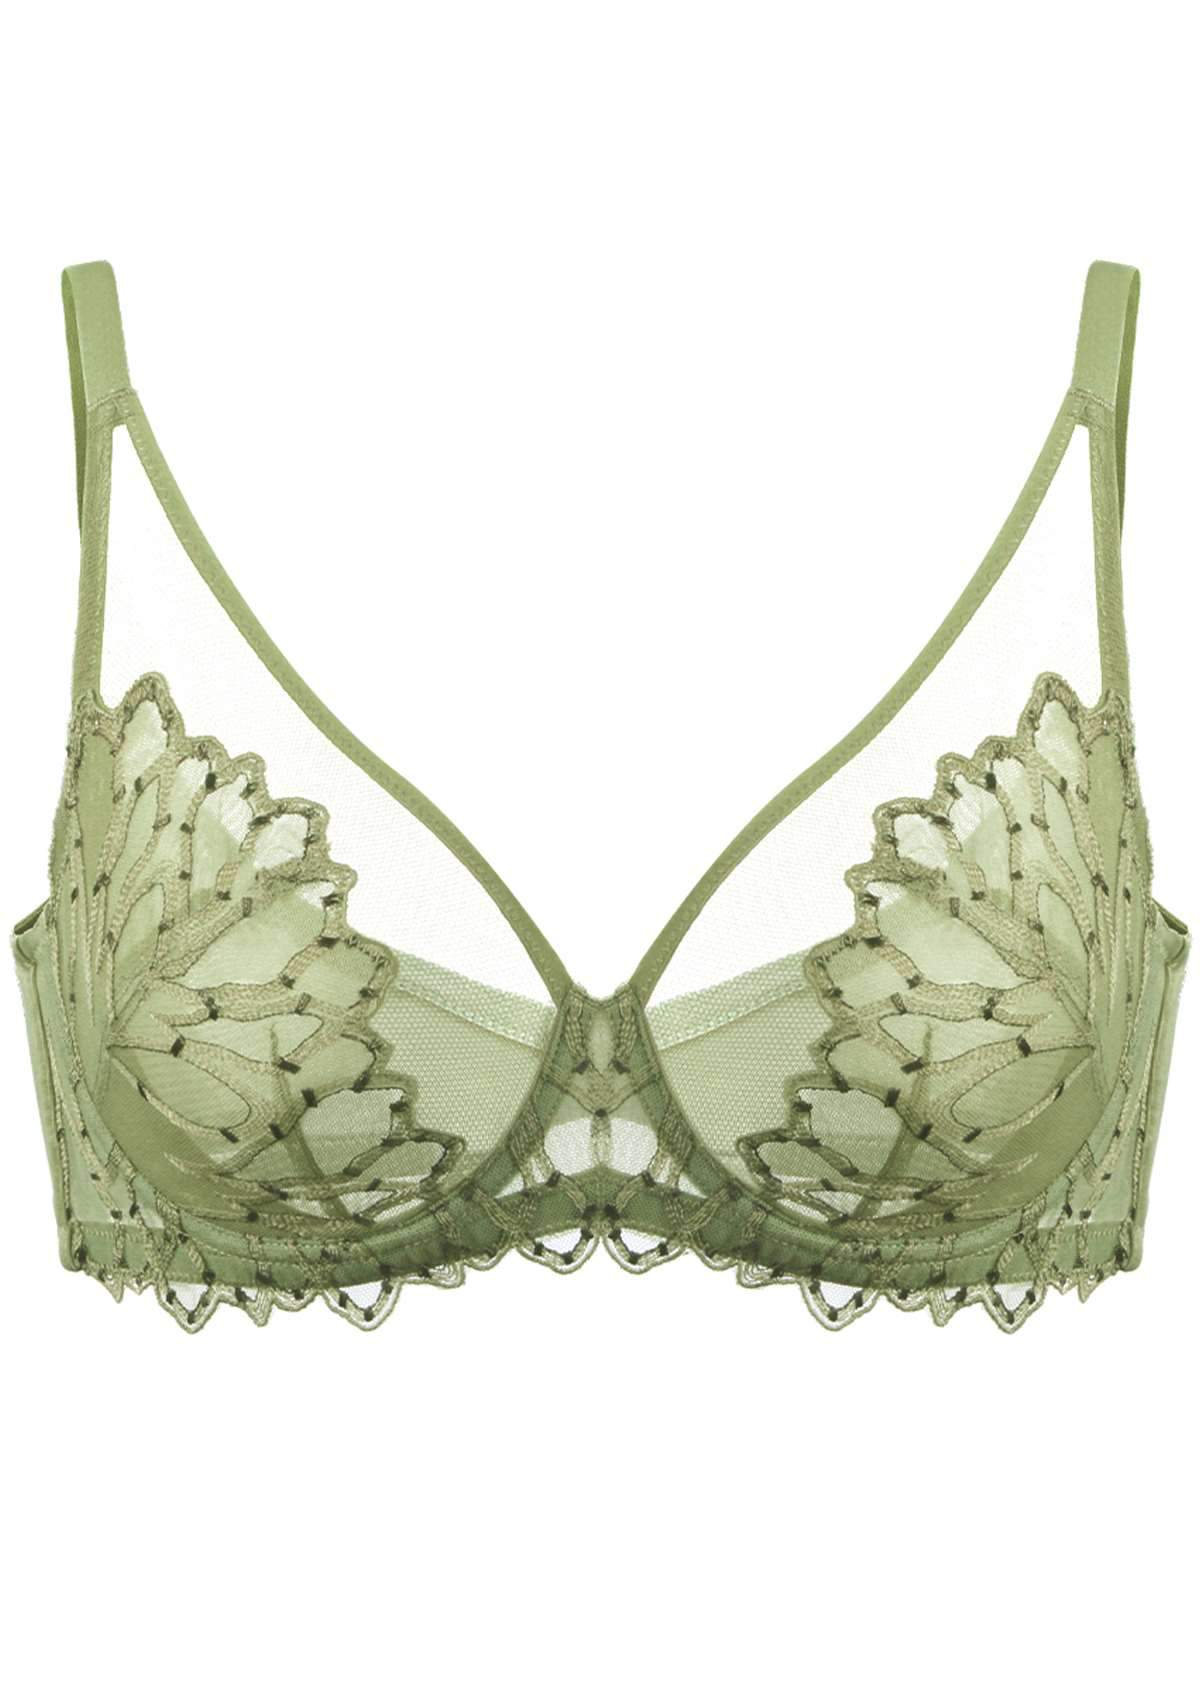 HSIA Chrysanthemum Floral Embroidered Bra: Lace Sheer Unpadded Bra - Green / 36 / C